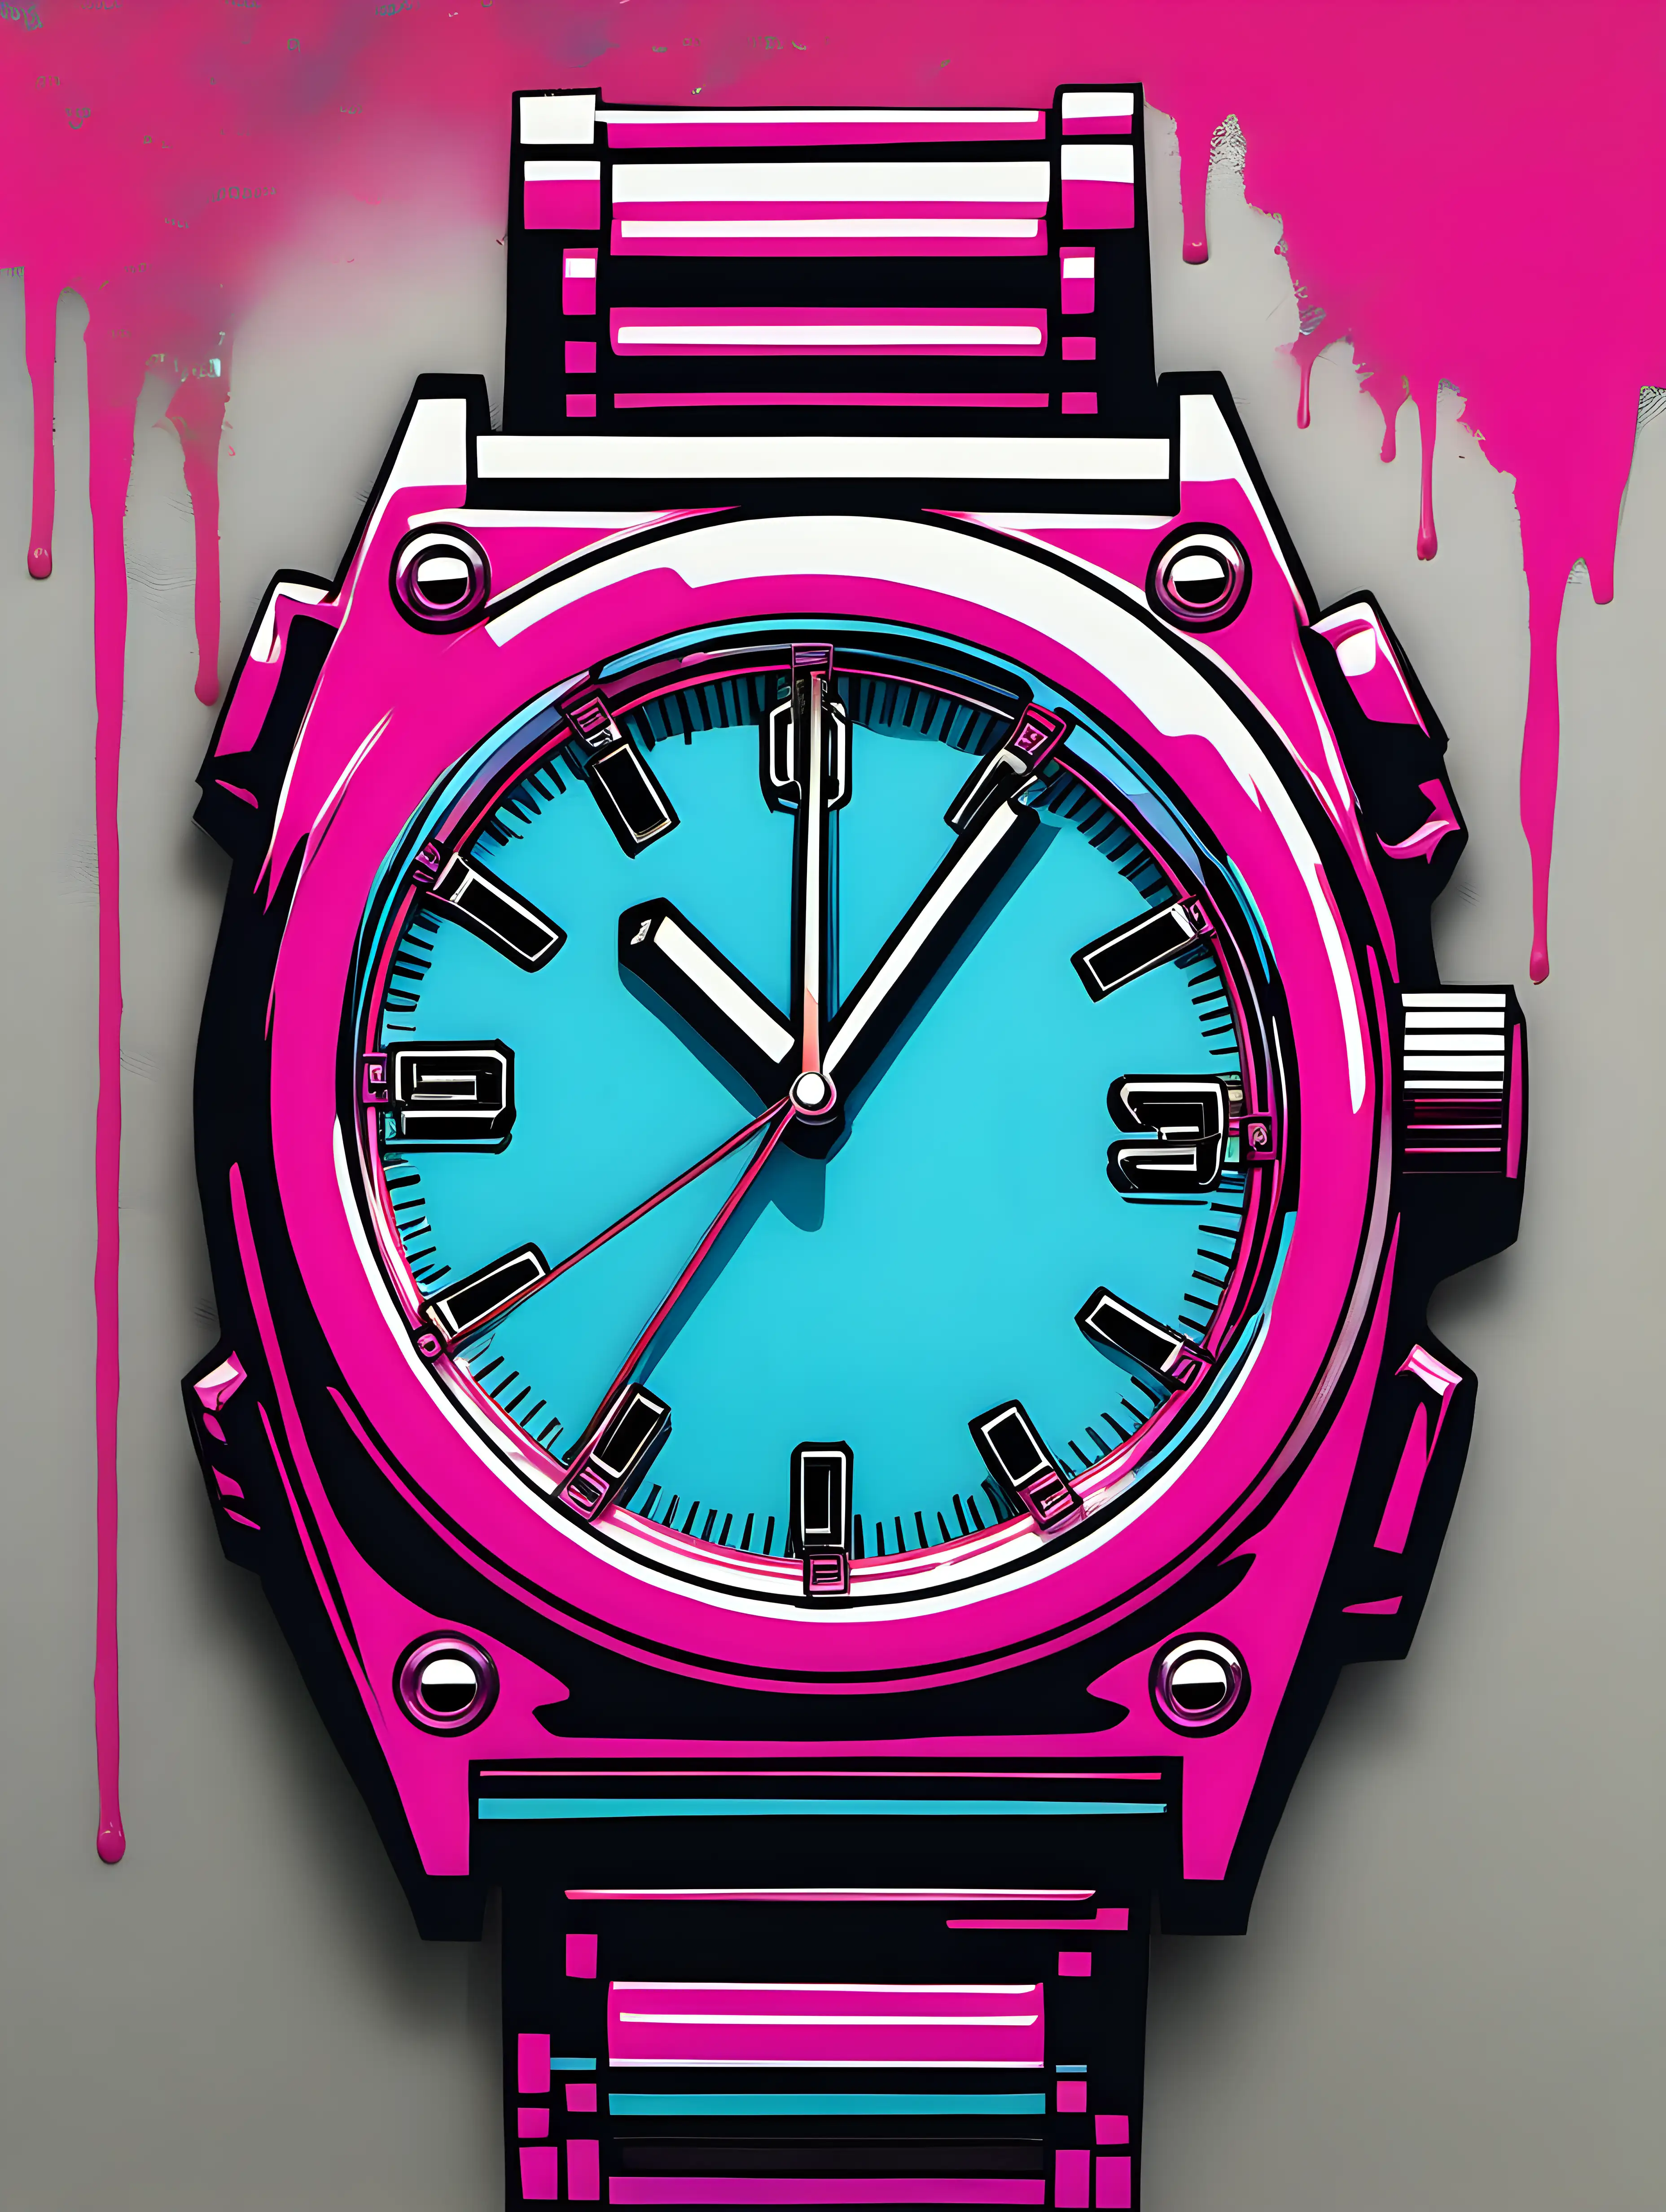 Create a highly detailed spray paint artwork featuring a classic digital watch from the 1980s. The watch should be central in the composition and exhibit characteristics typical of 1980s technology and style. It should have a rectangular face with a clear digital display, showing time in a typical LCD font. The watchband should be of a solid, retro color like neon or pastel, characteristic of the era. The background should capture the essence of the 80s, perhaps including elements like bright, bold geometric patterns, or iconic 80s symbols. The overall art should have a vibrant, energetic feel, reflecting the fashion and tech trends of the 1980s, with an emphasis on the unique textures and layers achieved through spray paint